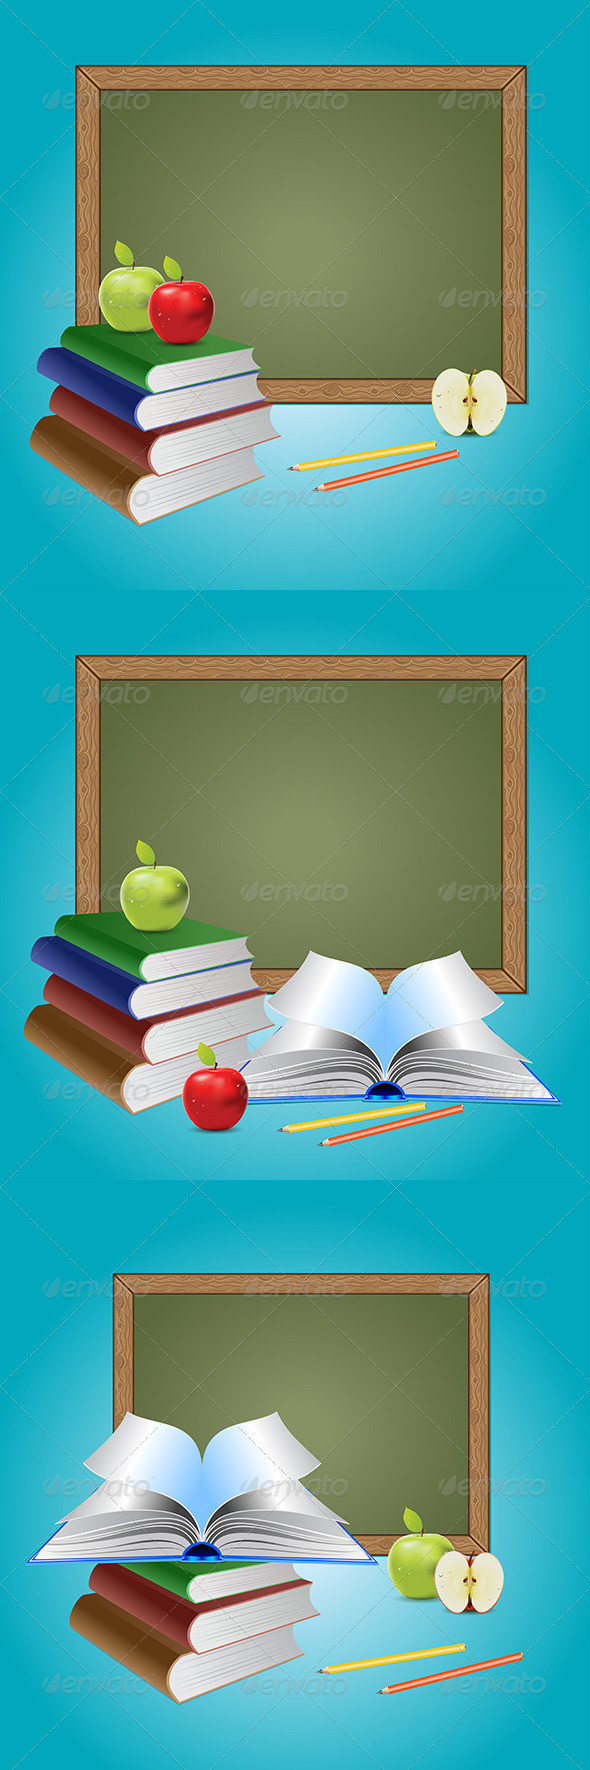 Chalkboard 20and 20books 20pw